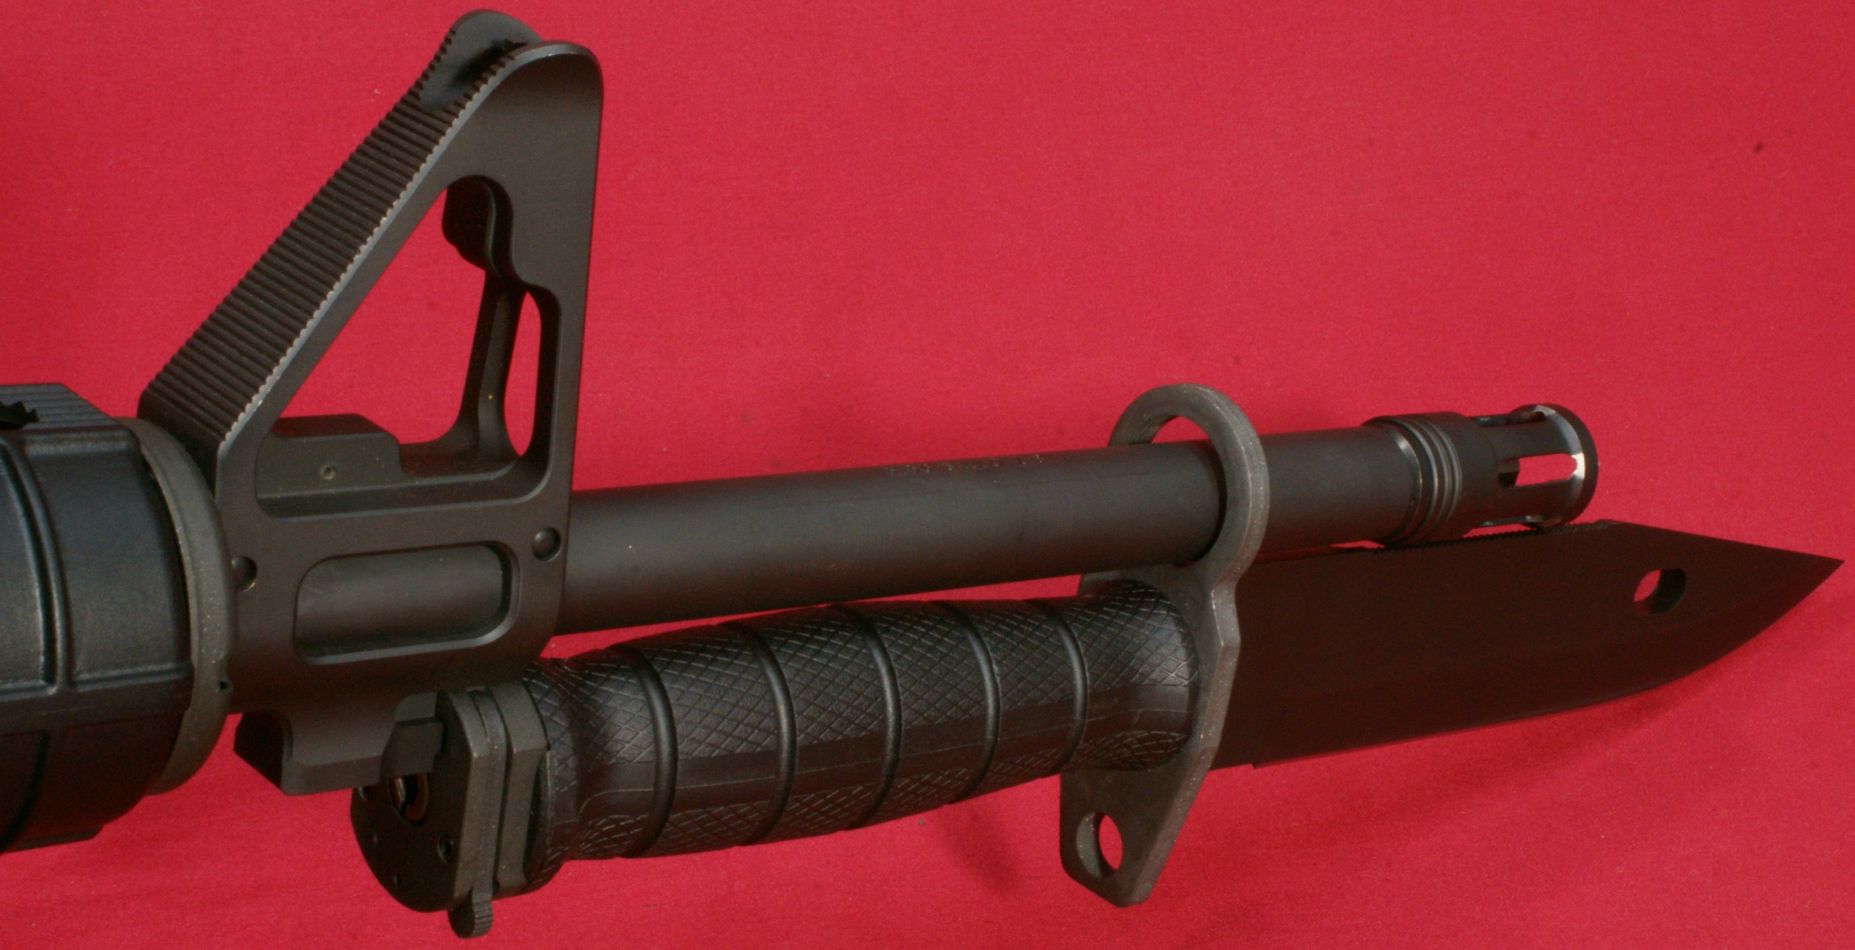 Why Did Ruger Design a Proprietary FSB and Include a Bayonet Lug? 